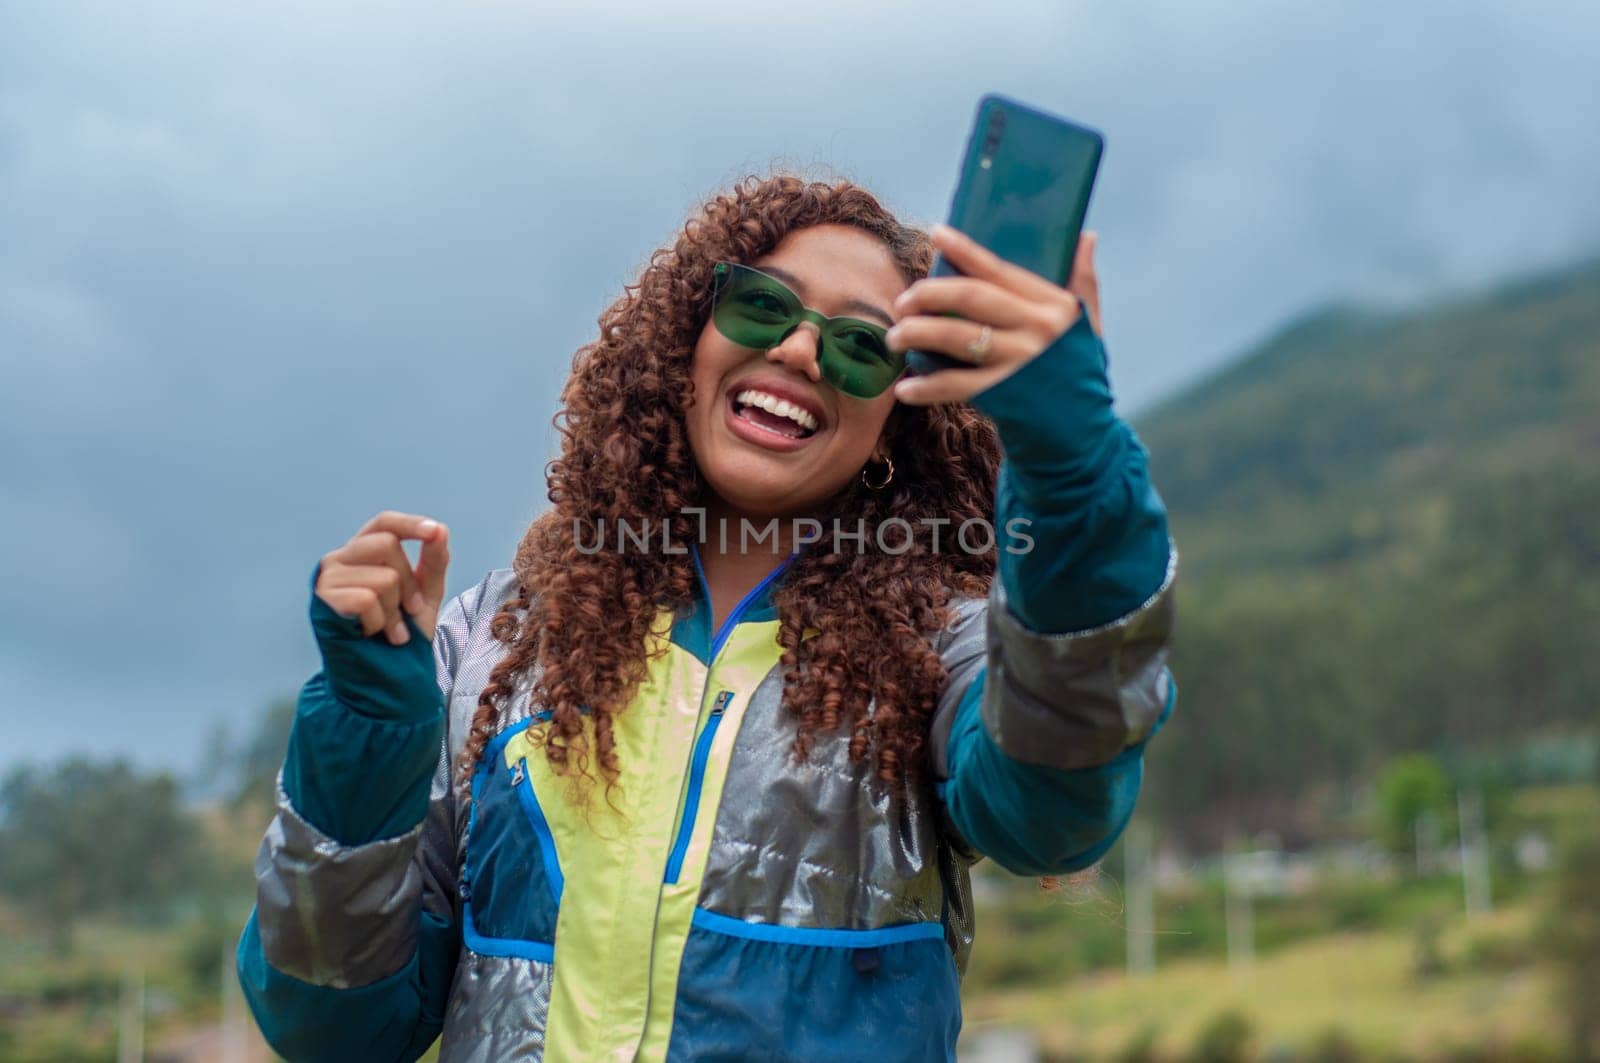 tourism vlogger connecting with his audience on a mountain in ecuador with a big smile by Raulmartin